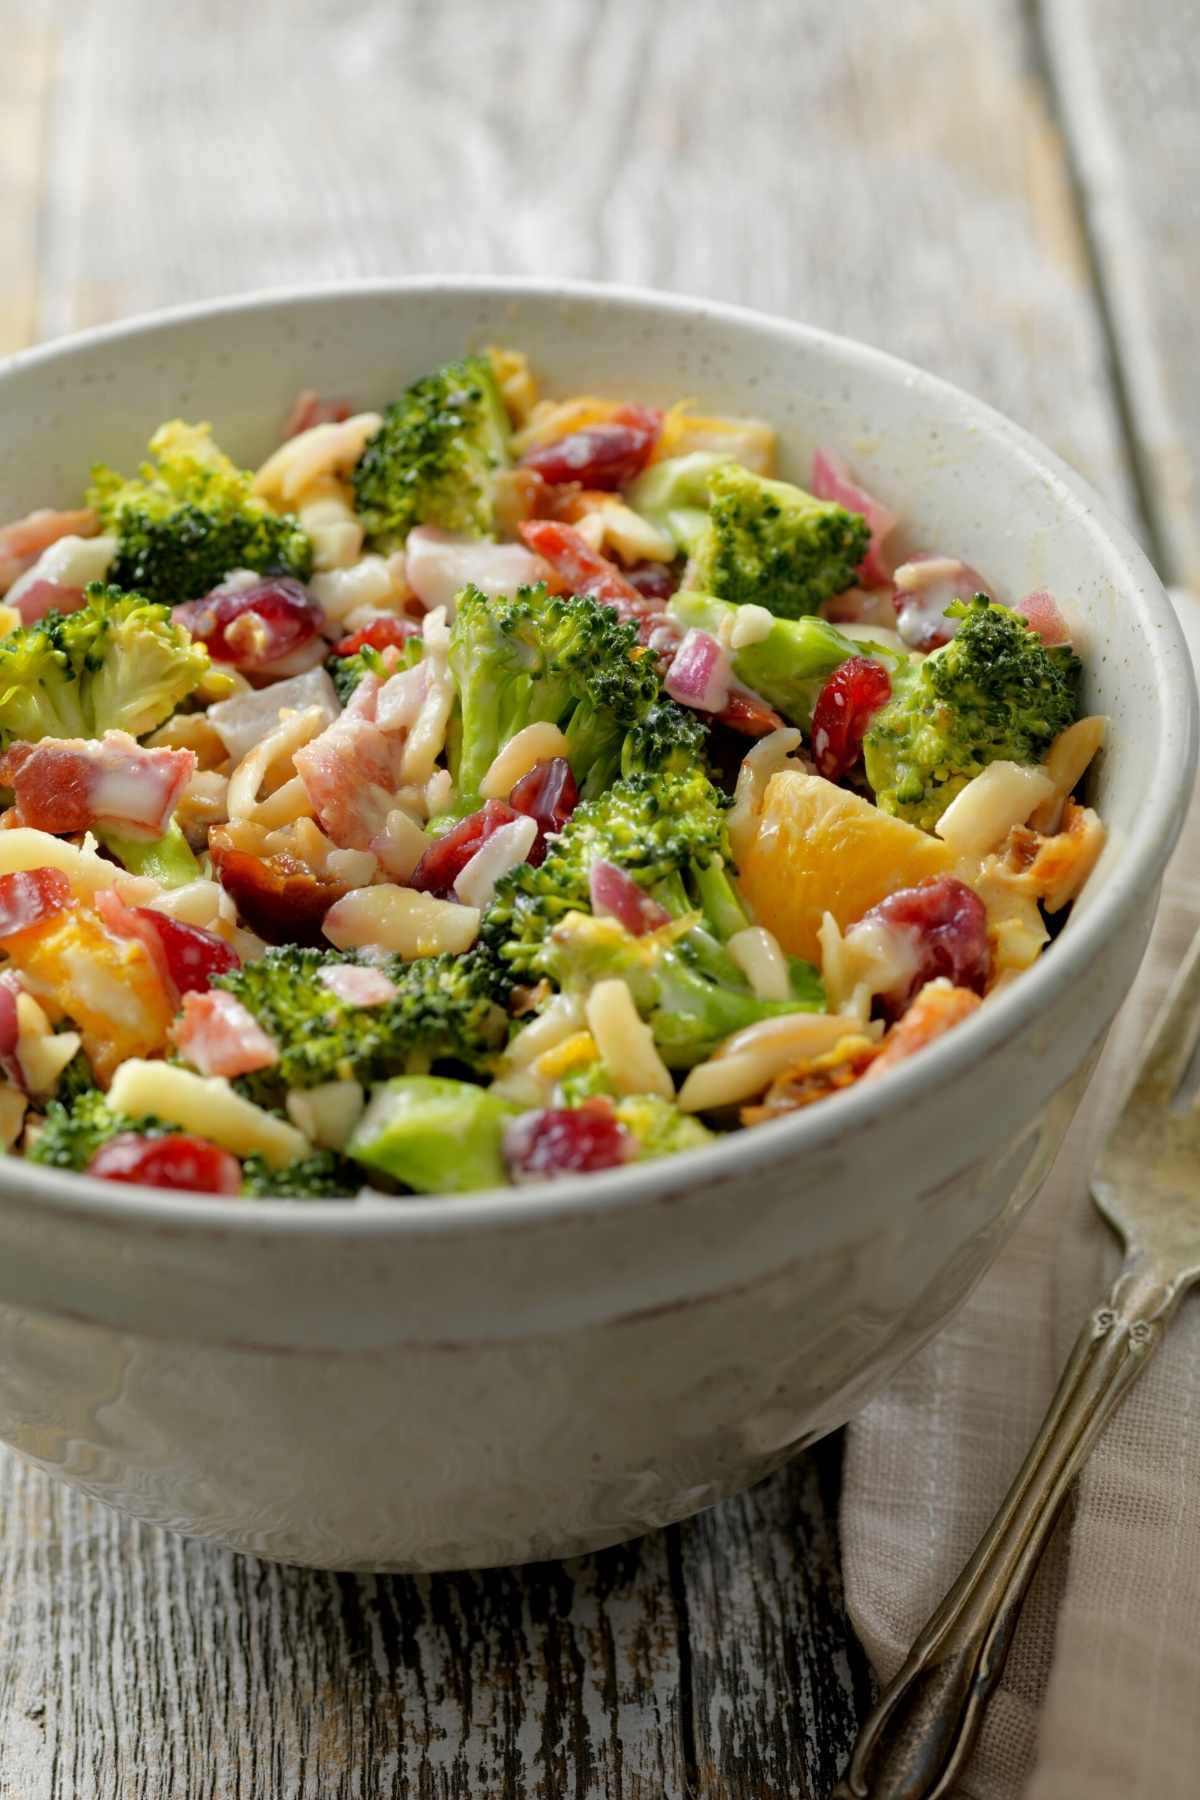 Switch up your salad game with this crunchy Broccoli Salad With Bacon. The raw broccoli florets pair beautifully with tart dried cranberries, sharp cheddar cheese, salty sunflower seeds, and smokey bacon tossed in a creamy dressing.